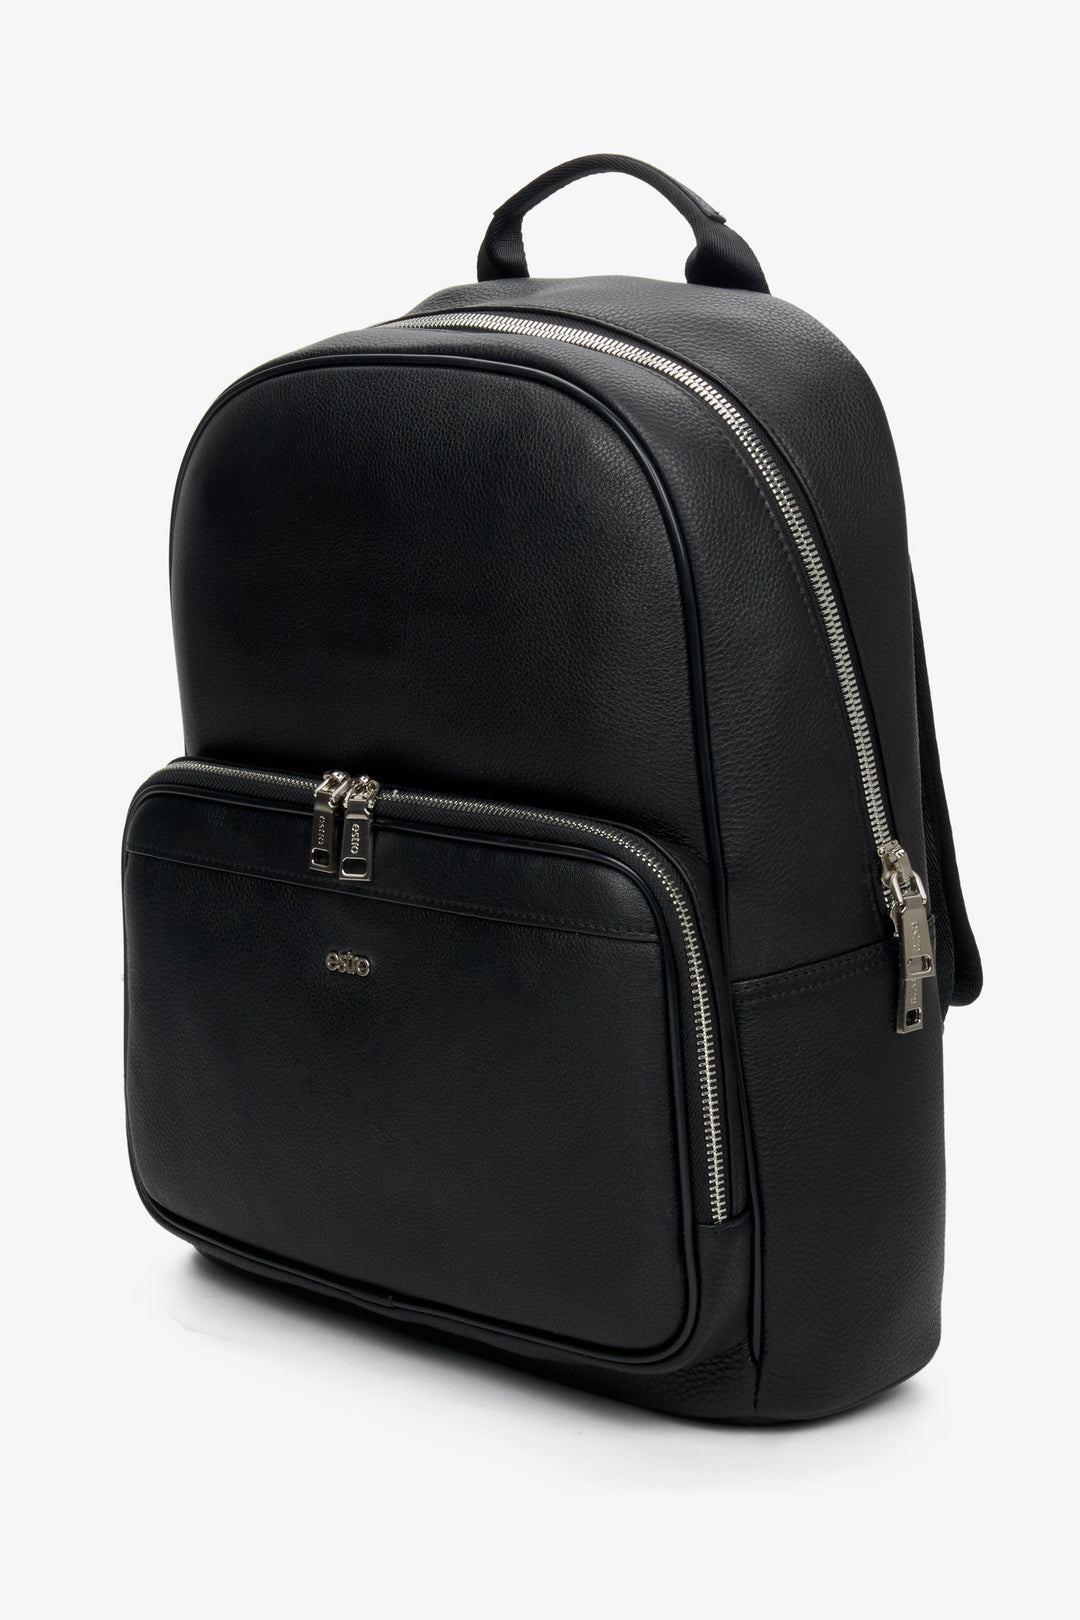 Men's black backpack made of genuine leather with silver details by Estro.